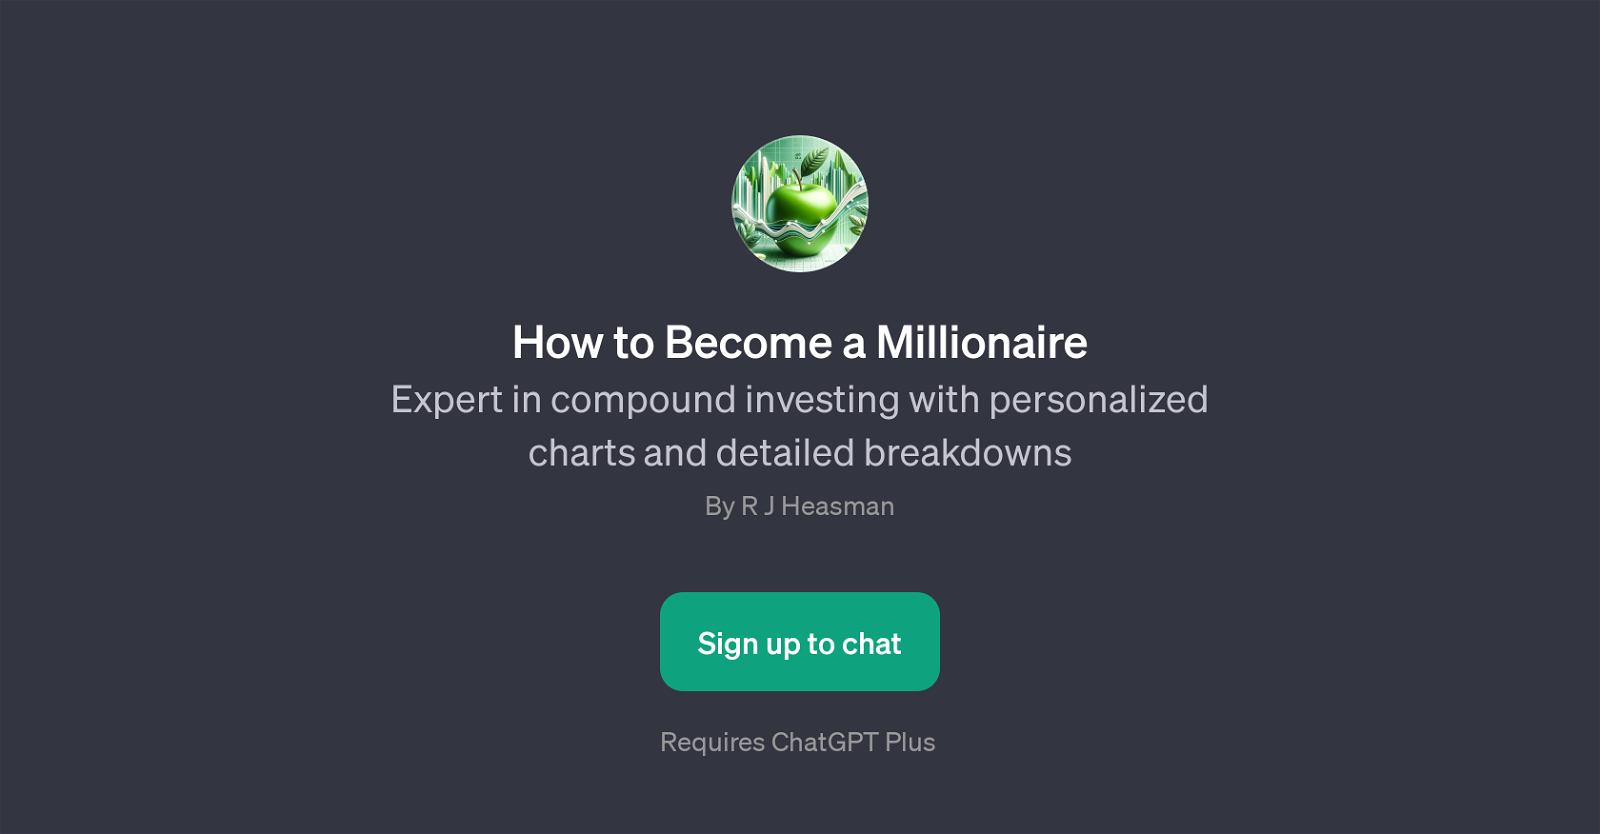 How to Become a Millionaire website